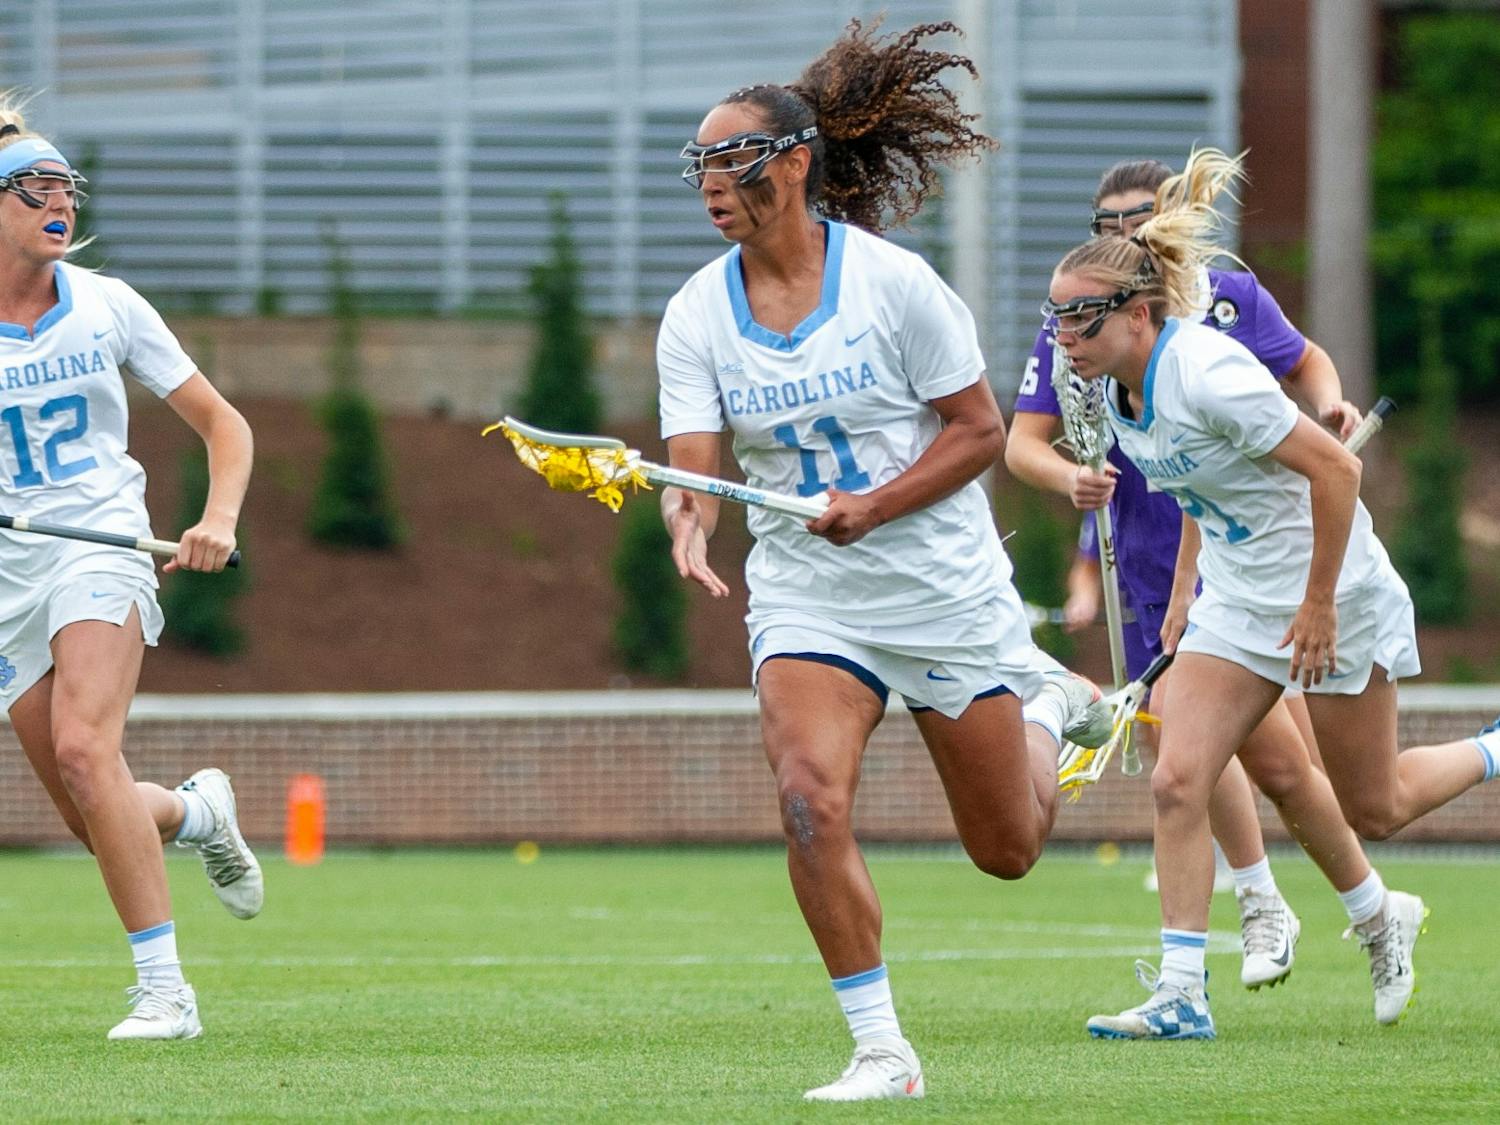 UNC senior defender Kayla Wood (11) runs with the ball at the second round of the NCAA tournament against James Madison on Sunday May 16, 2021 at the Dorrance Field in Chapel Hill. The Tar Heels won 14-9.